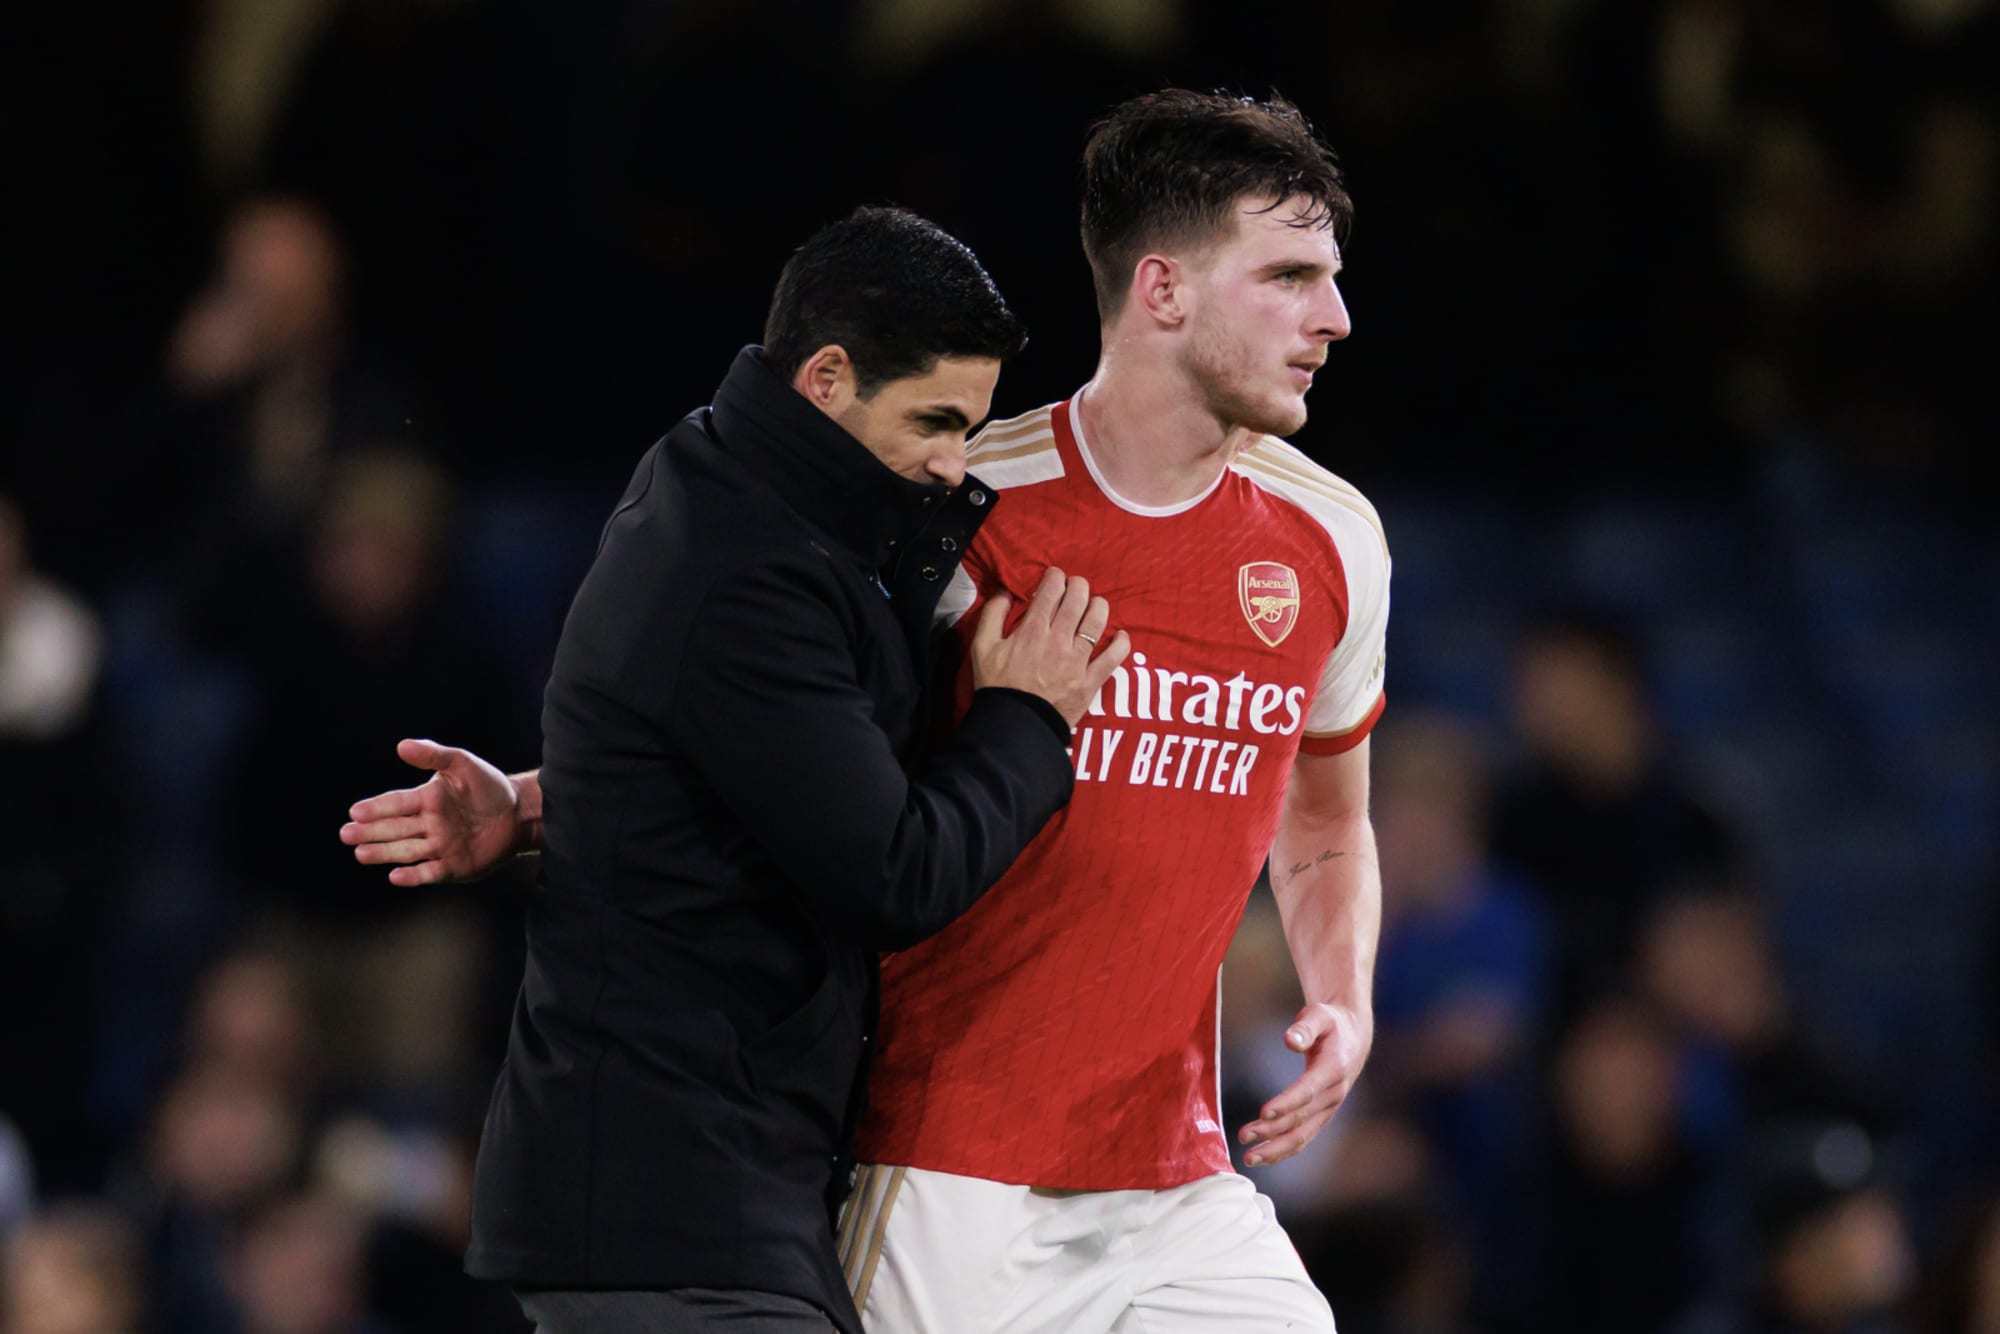 Arsenal January transfer target would add more firepower to Declan Rice